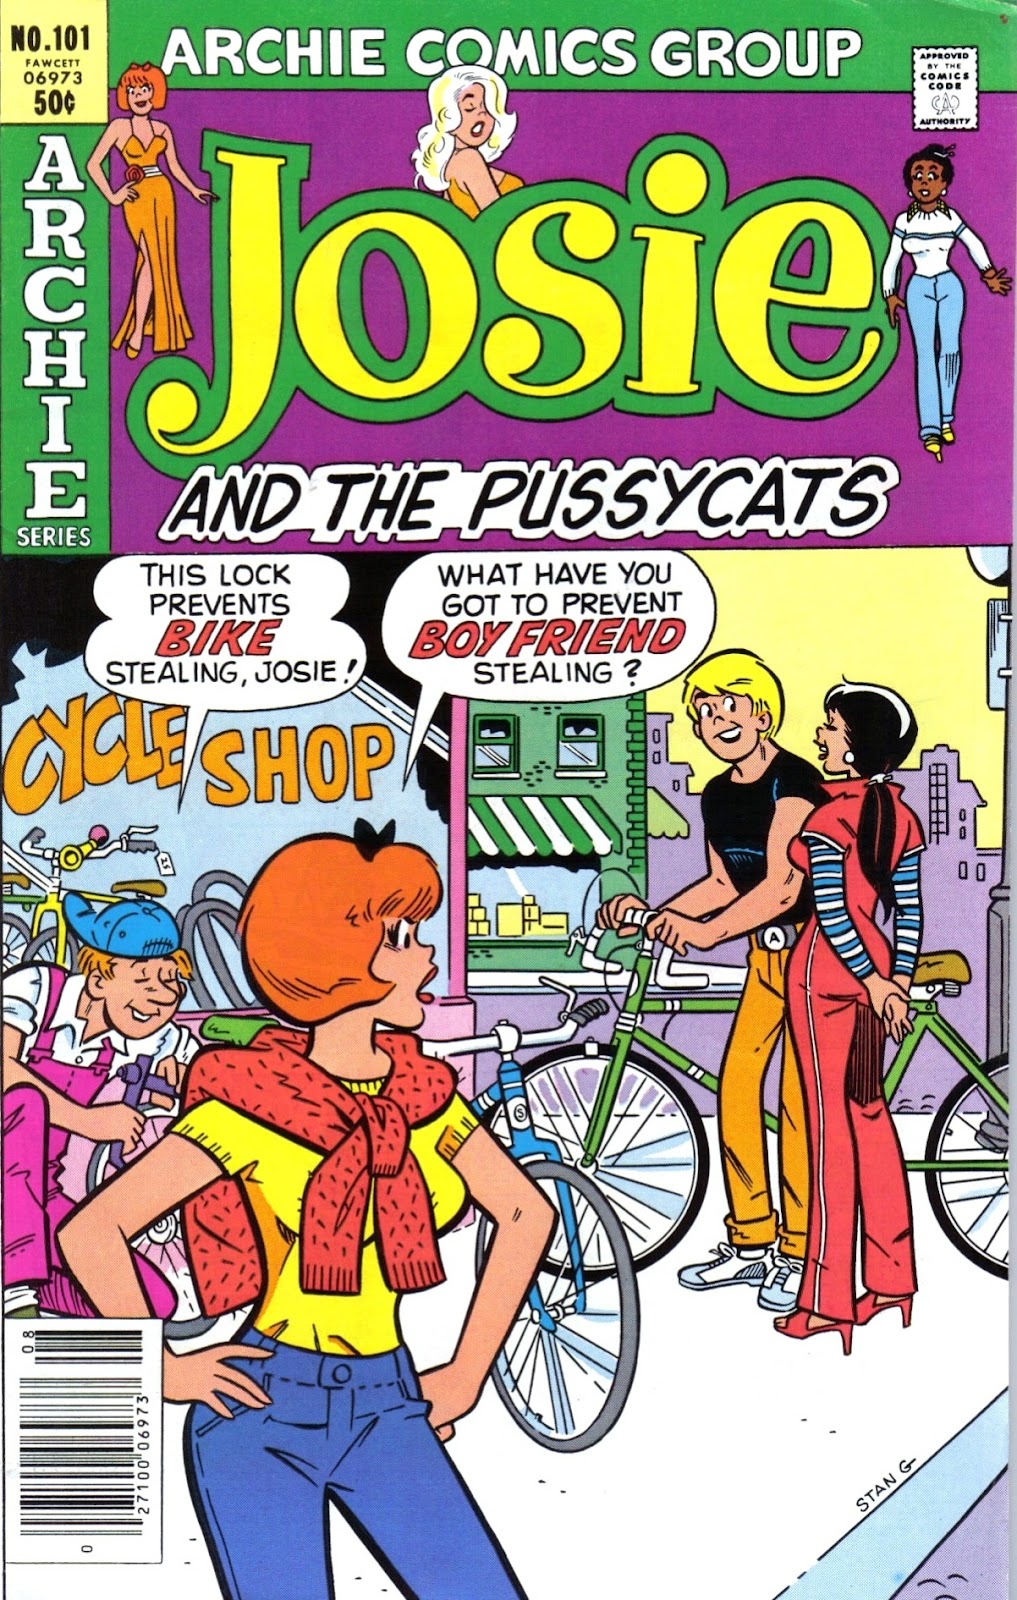 Josie and the Pussycats (1969) issue 101 - Page 1